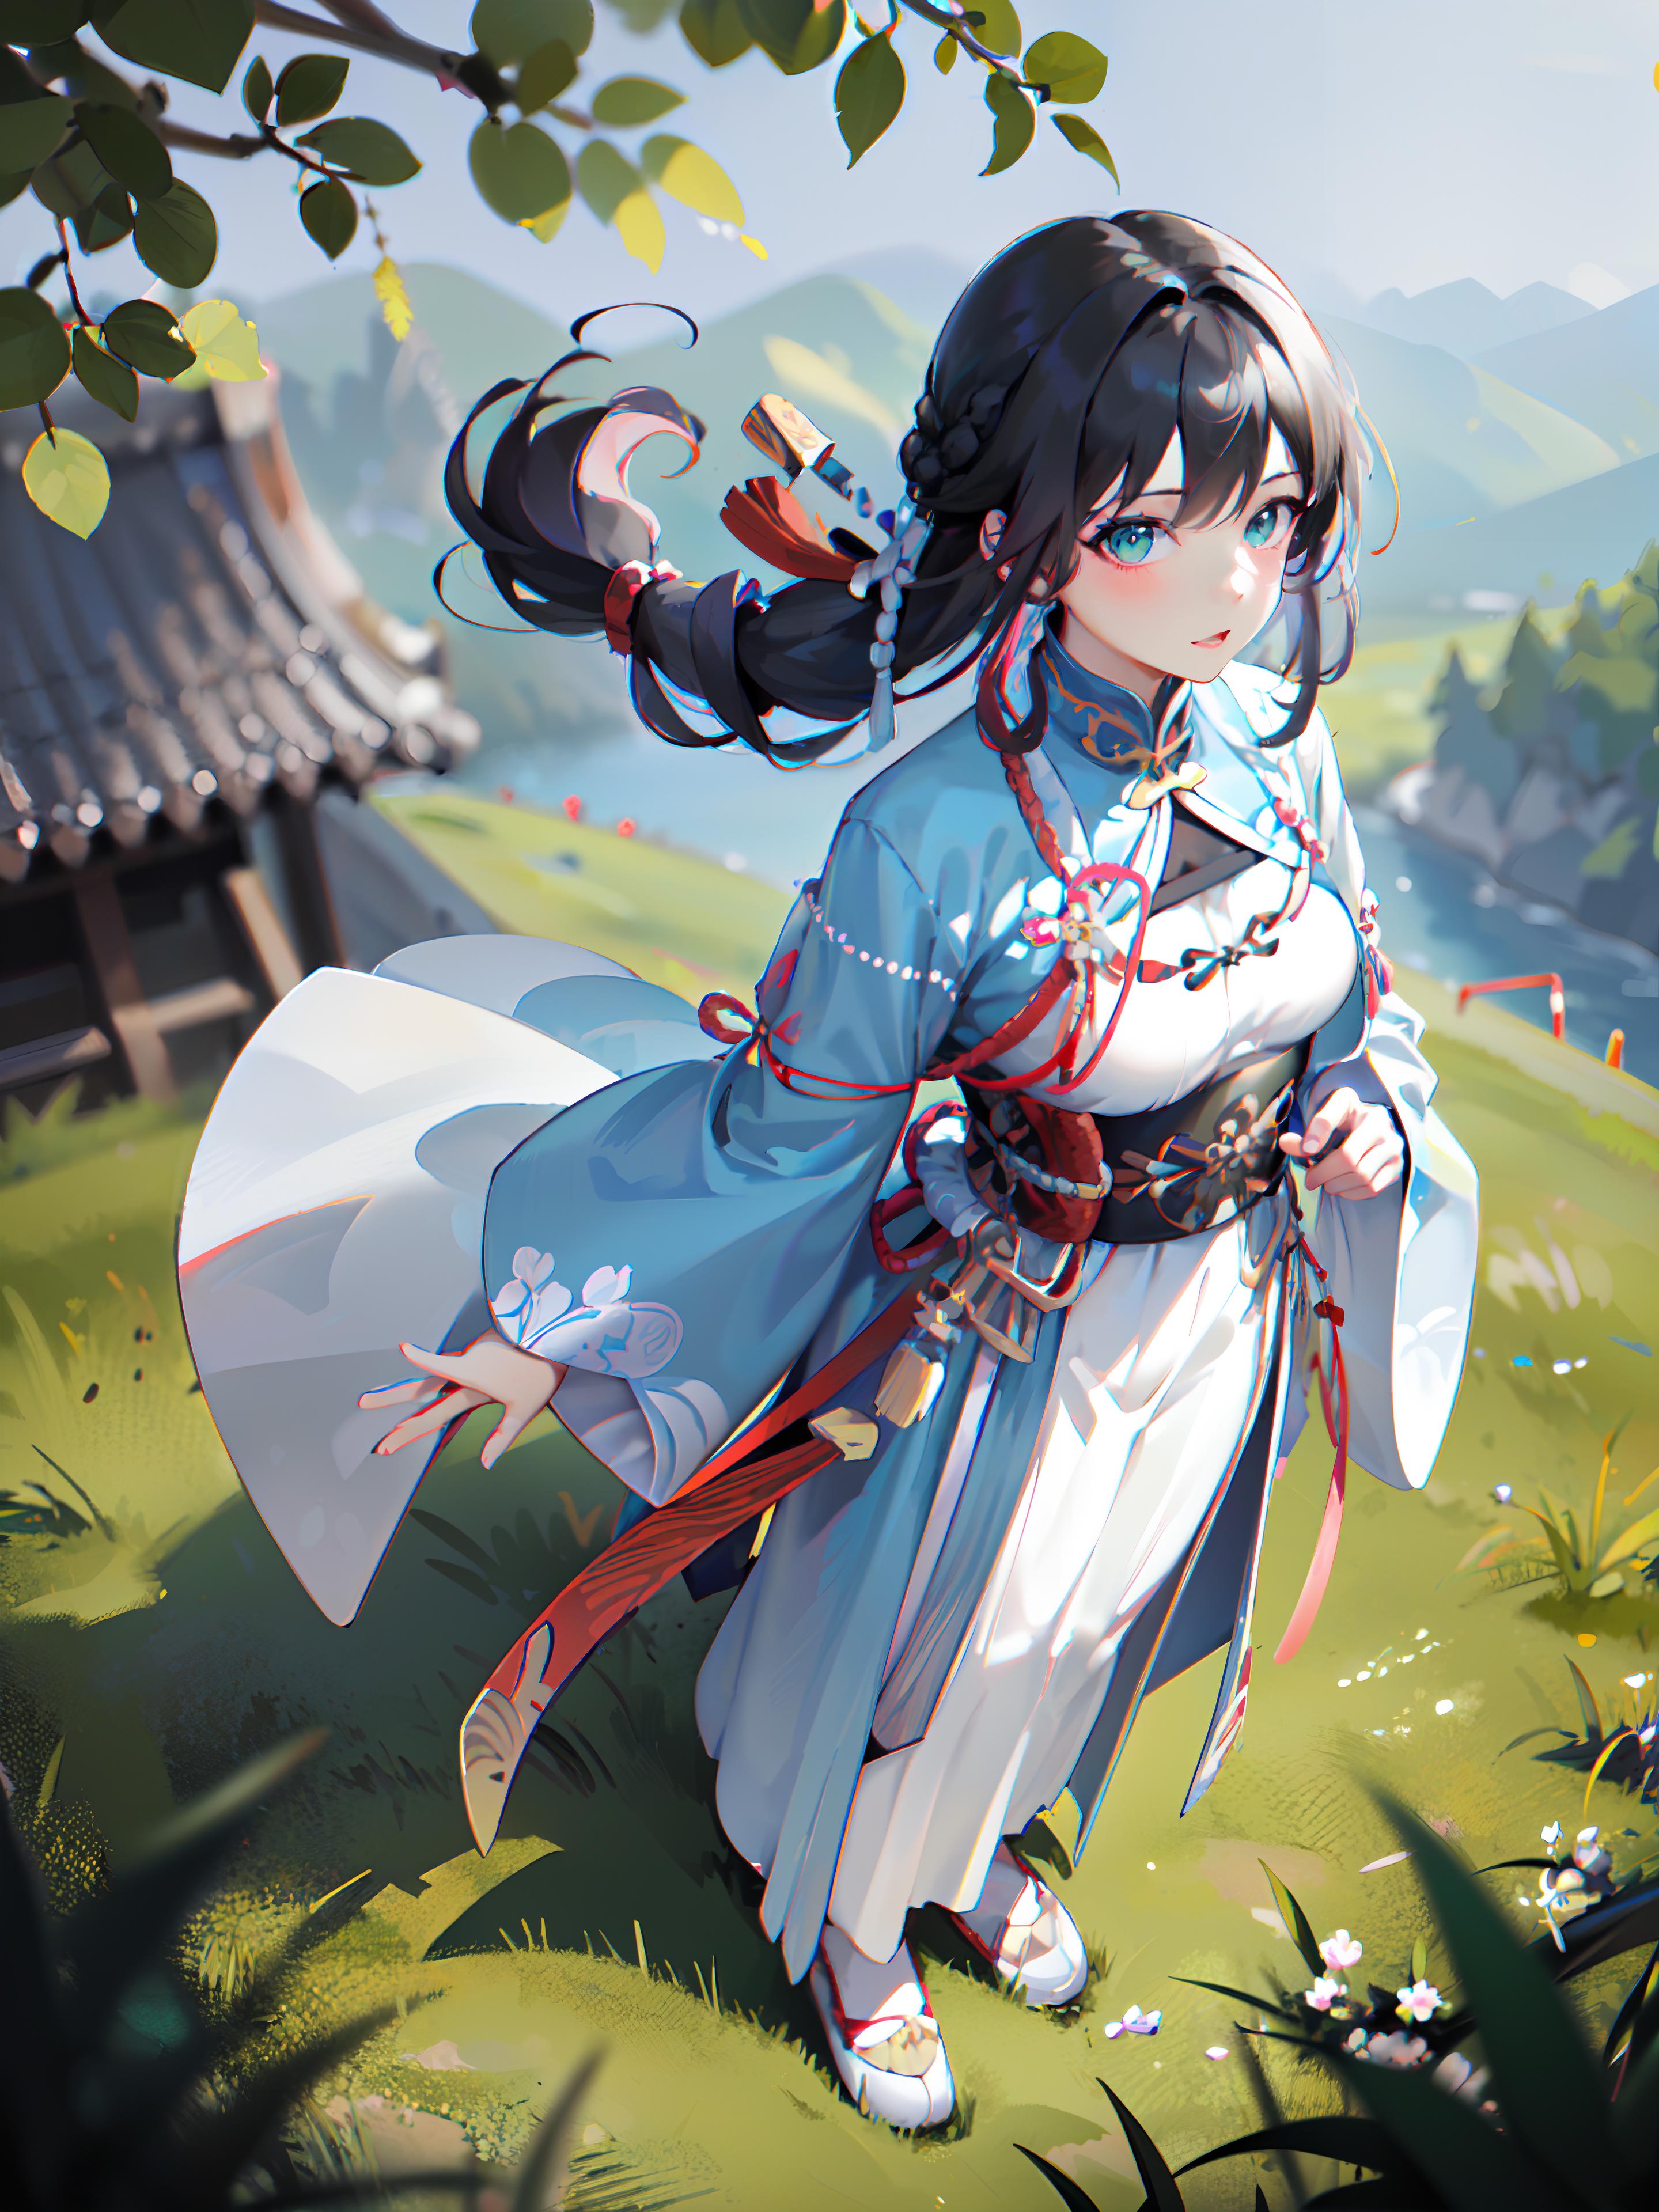 A Japanese woman wearing a blue kimono and holding a sword stands in a grassy field.